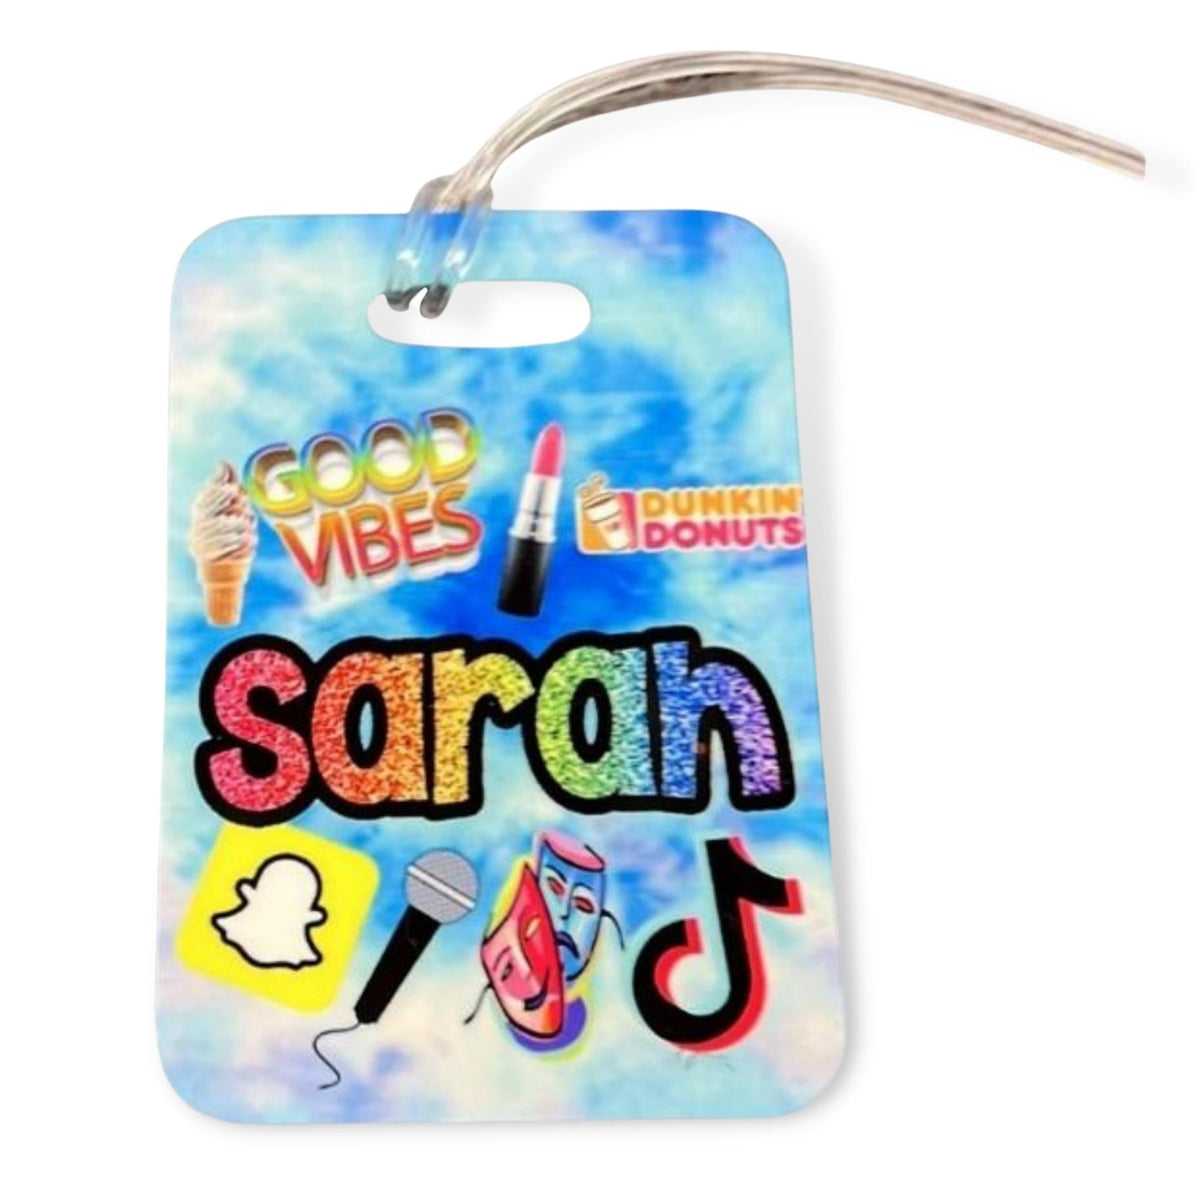 Bus/Trunk/Luggage Tags - a Spirit Animal - accessories camp Junior Large